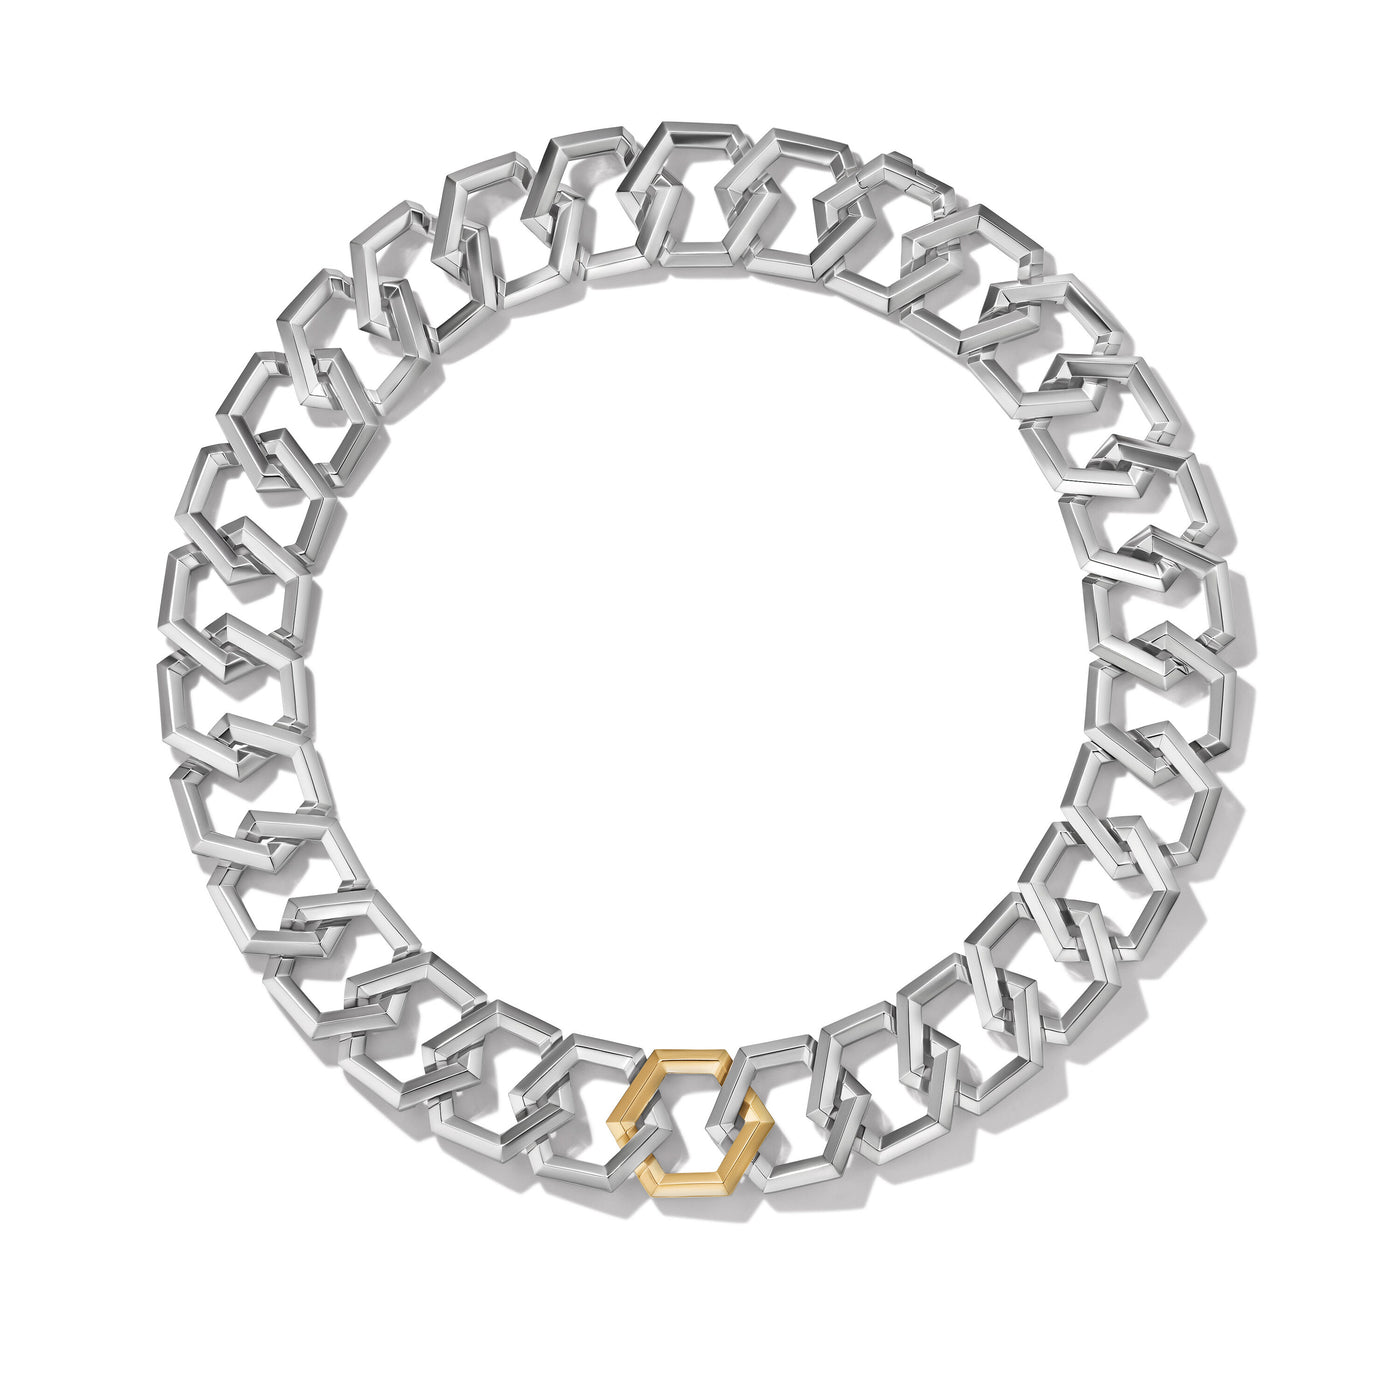 Carlyle™ Necklace in Sterling Silver with 18K Yellow Gold\, 24mm